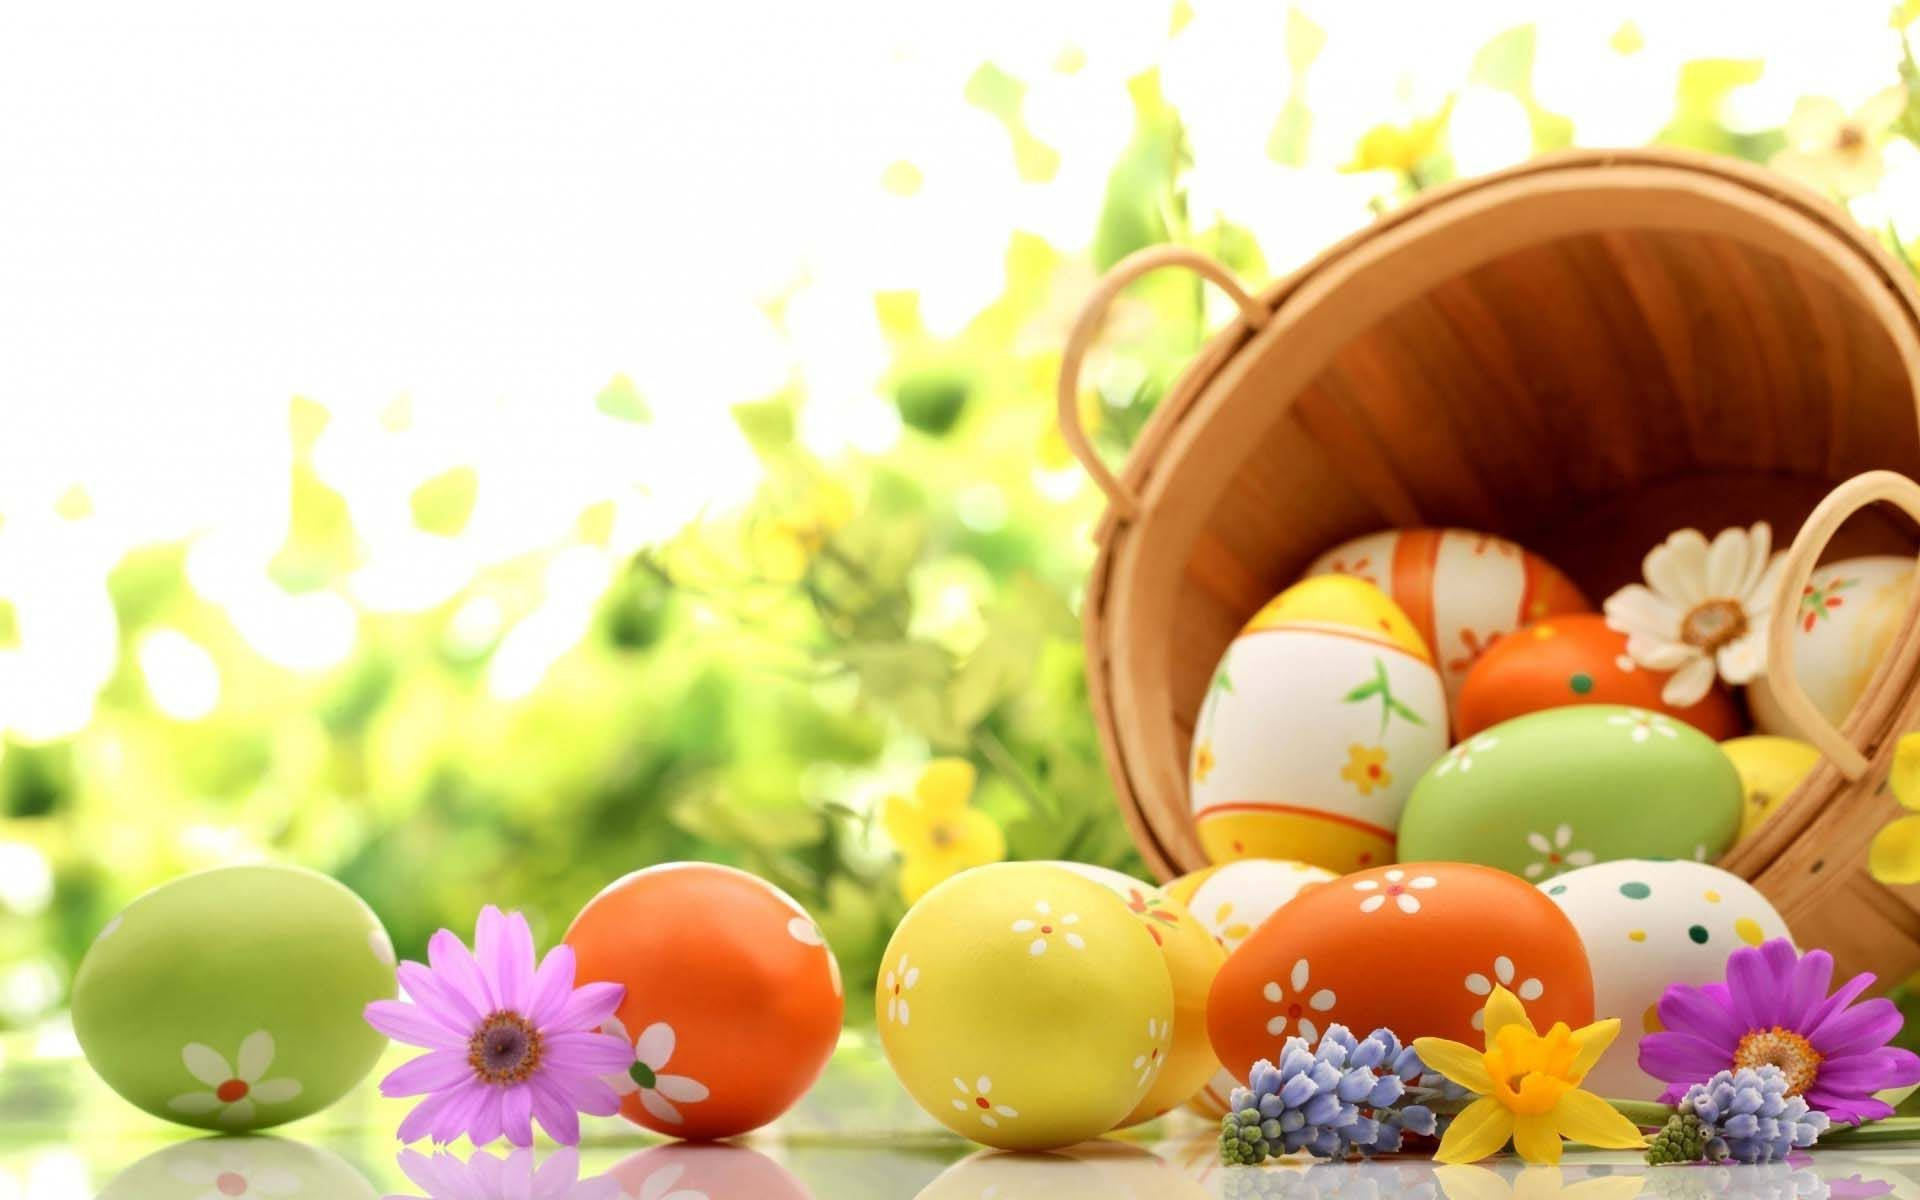 Happy Easter Basket Rolling With Colorful Eggs Background